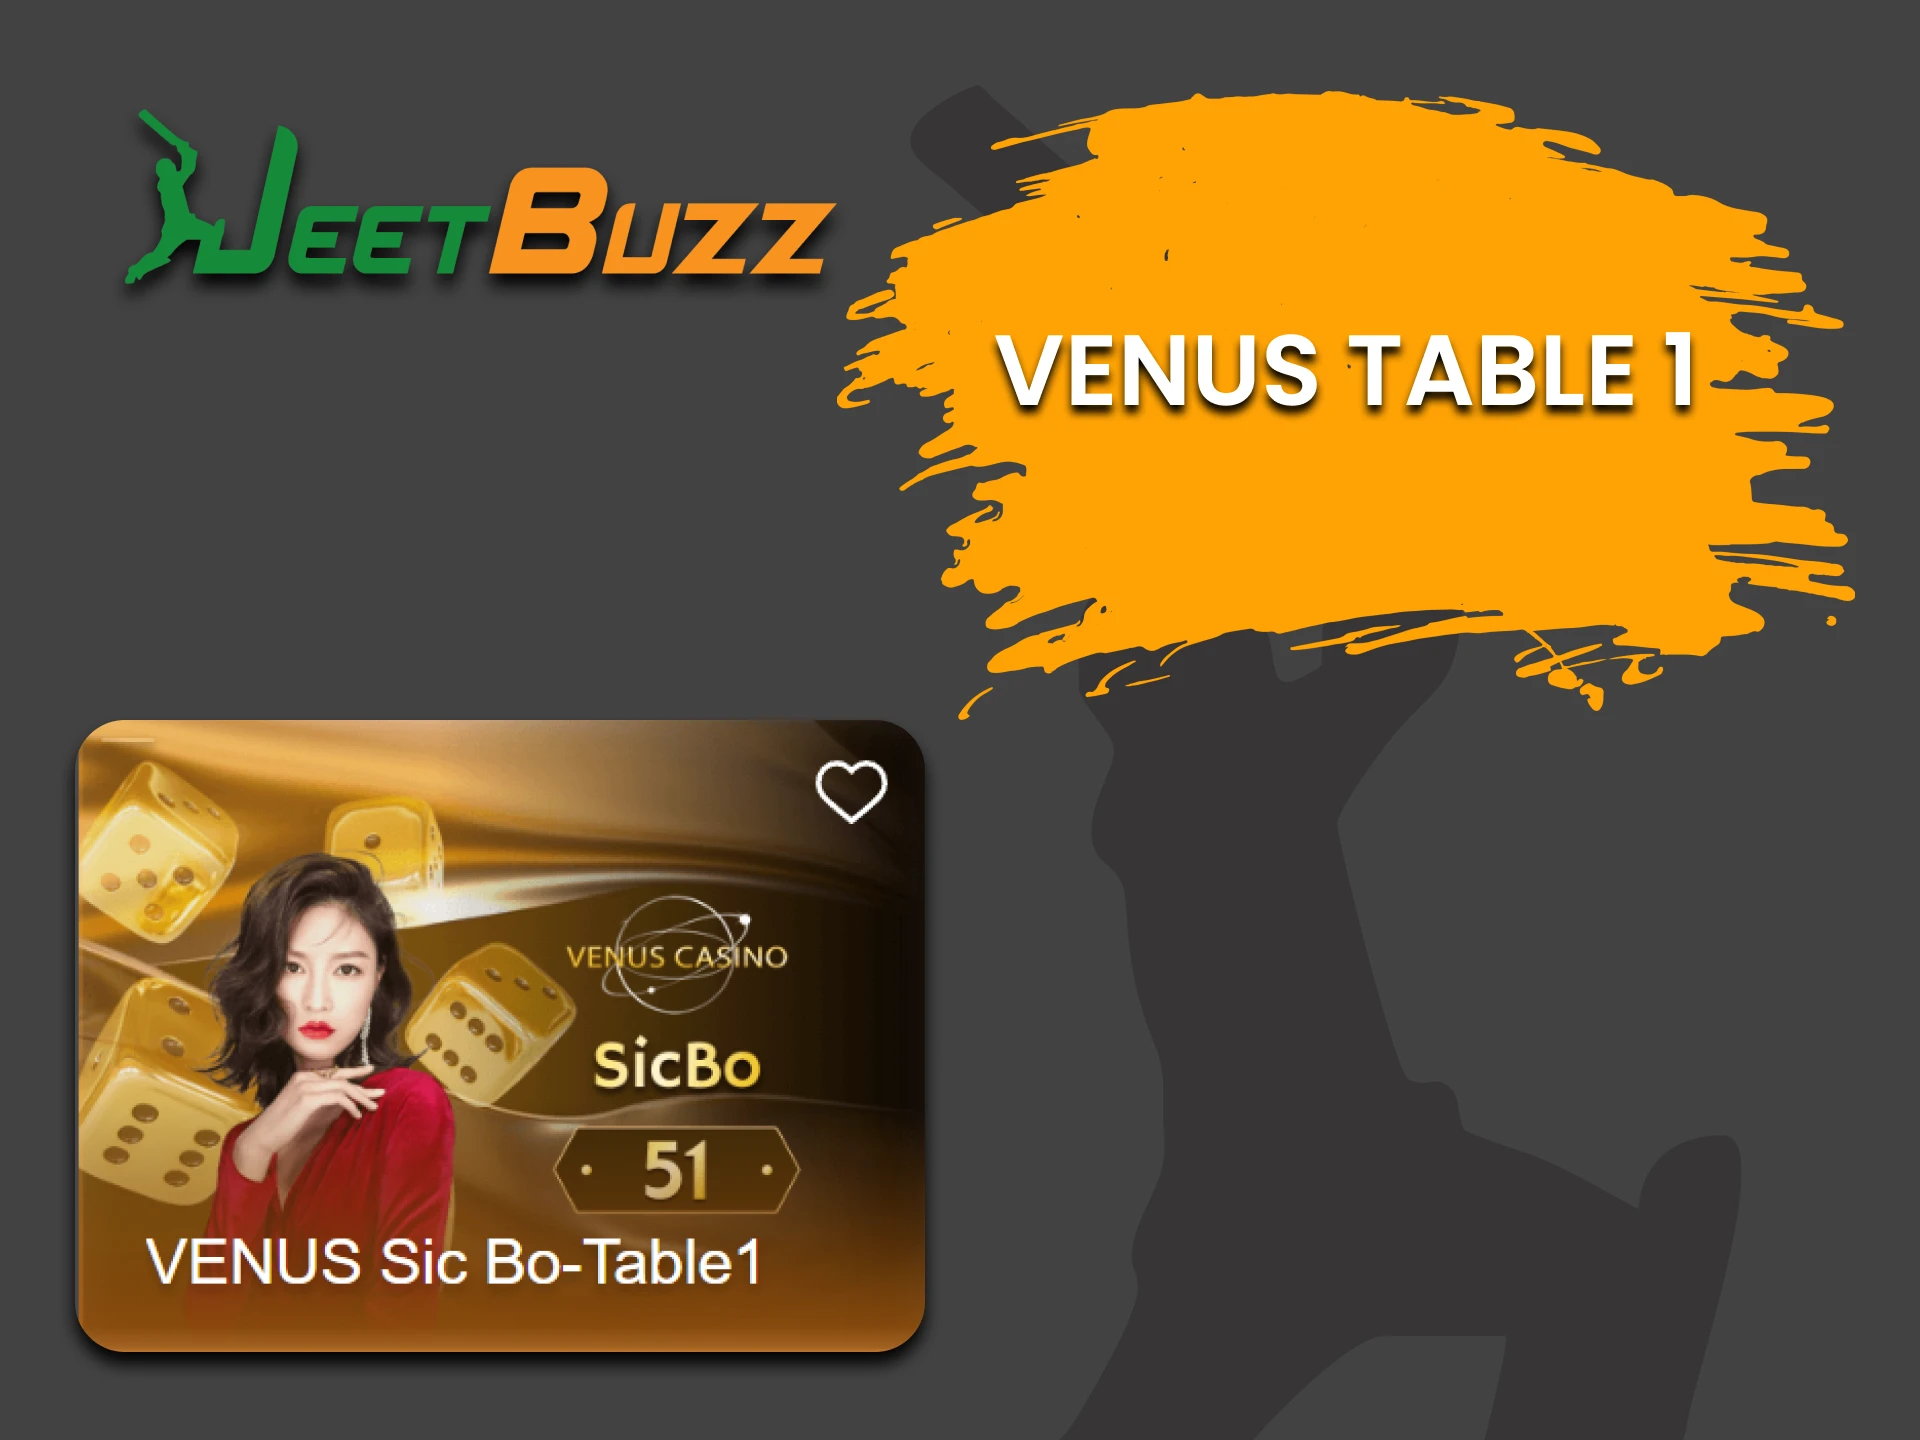 Try your hand at Sic Bo from the provider "Venus".